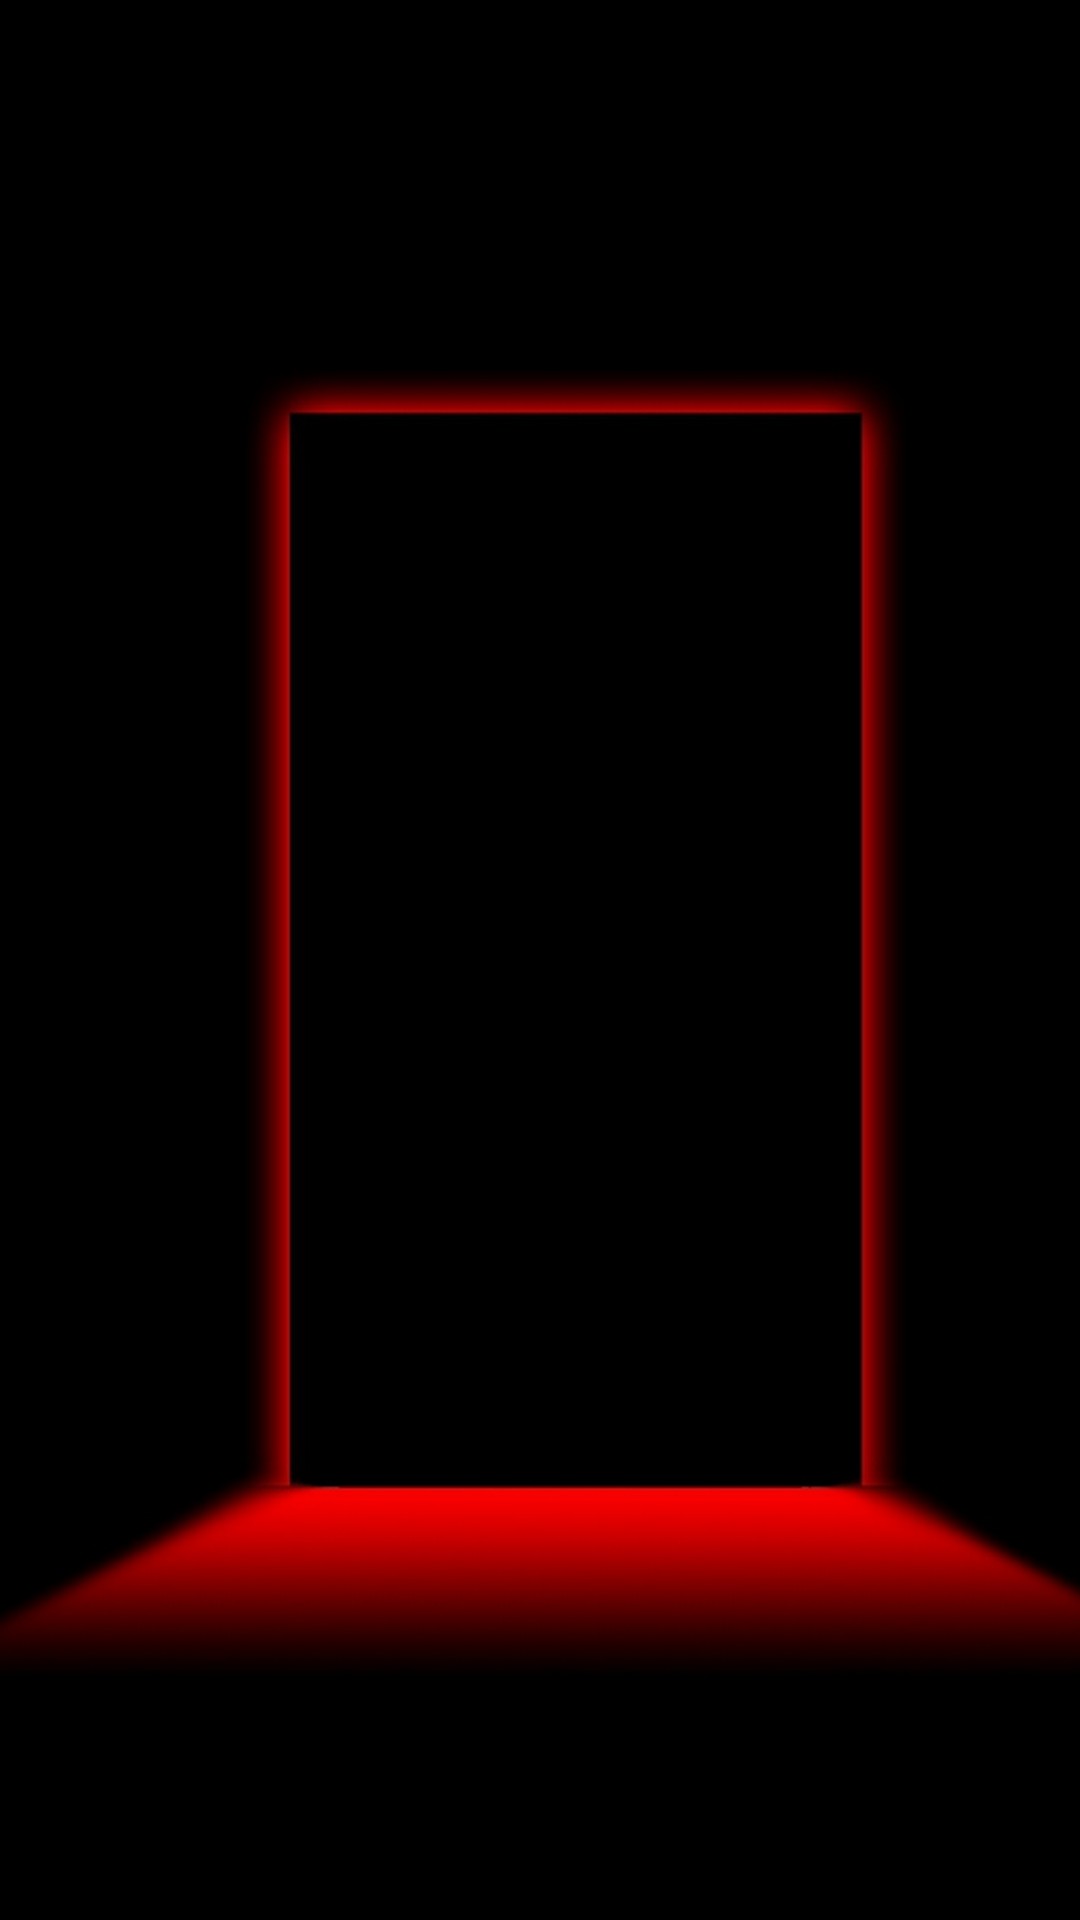 Black Wallpaper For iPhone with high-resolution 1080x1920 pixel. You can use this wallpaper for your iPhone 5, 6, 7, 8, X backgrounds, Mobile Screensaver, or iPad Lock Screen